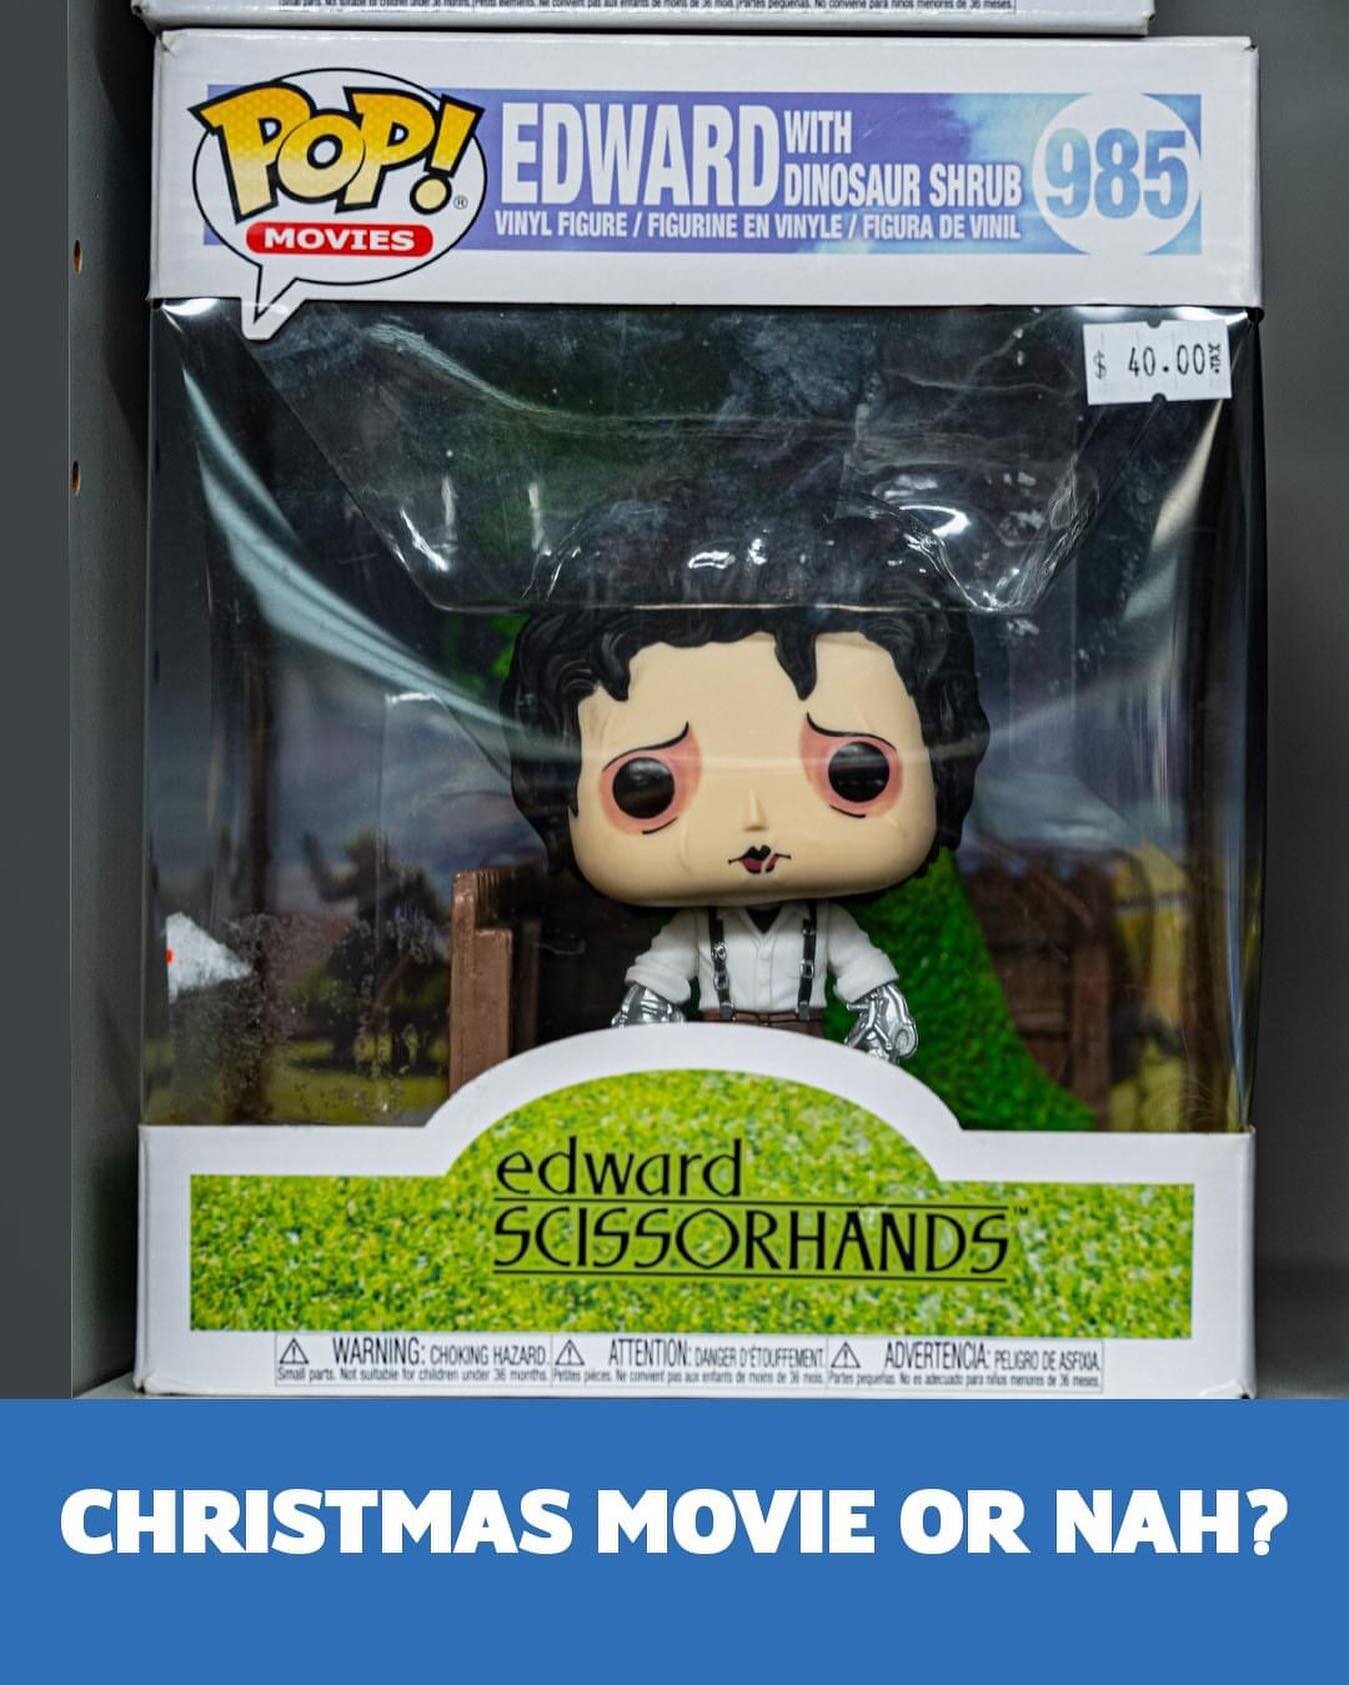 @jayhawkcoinsgamesandmore came across this Funko Pop and had a friendly debate whether Edward Scissorhands is a Christmas movie?

#funko #funkopop #pops #collection #collectibles #christmas #holidays #edwardscissorhands #movie #film #actor #timburton